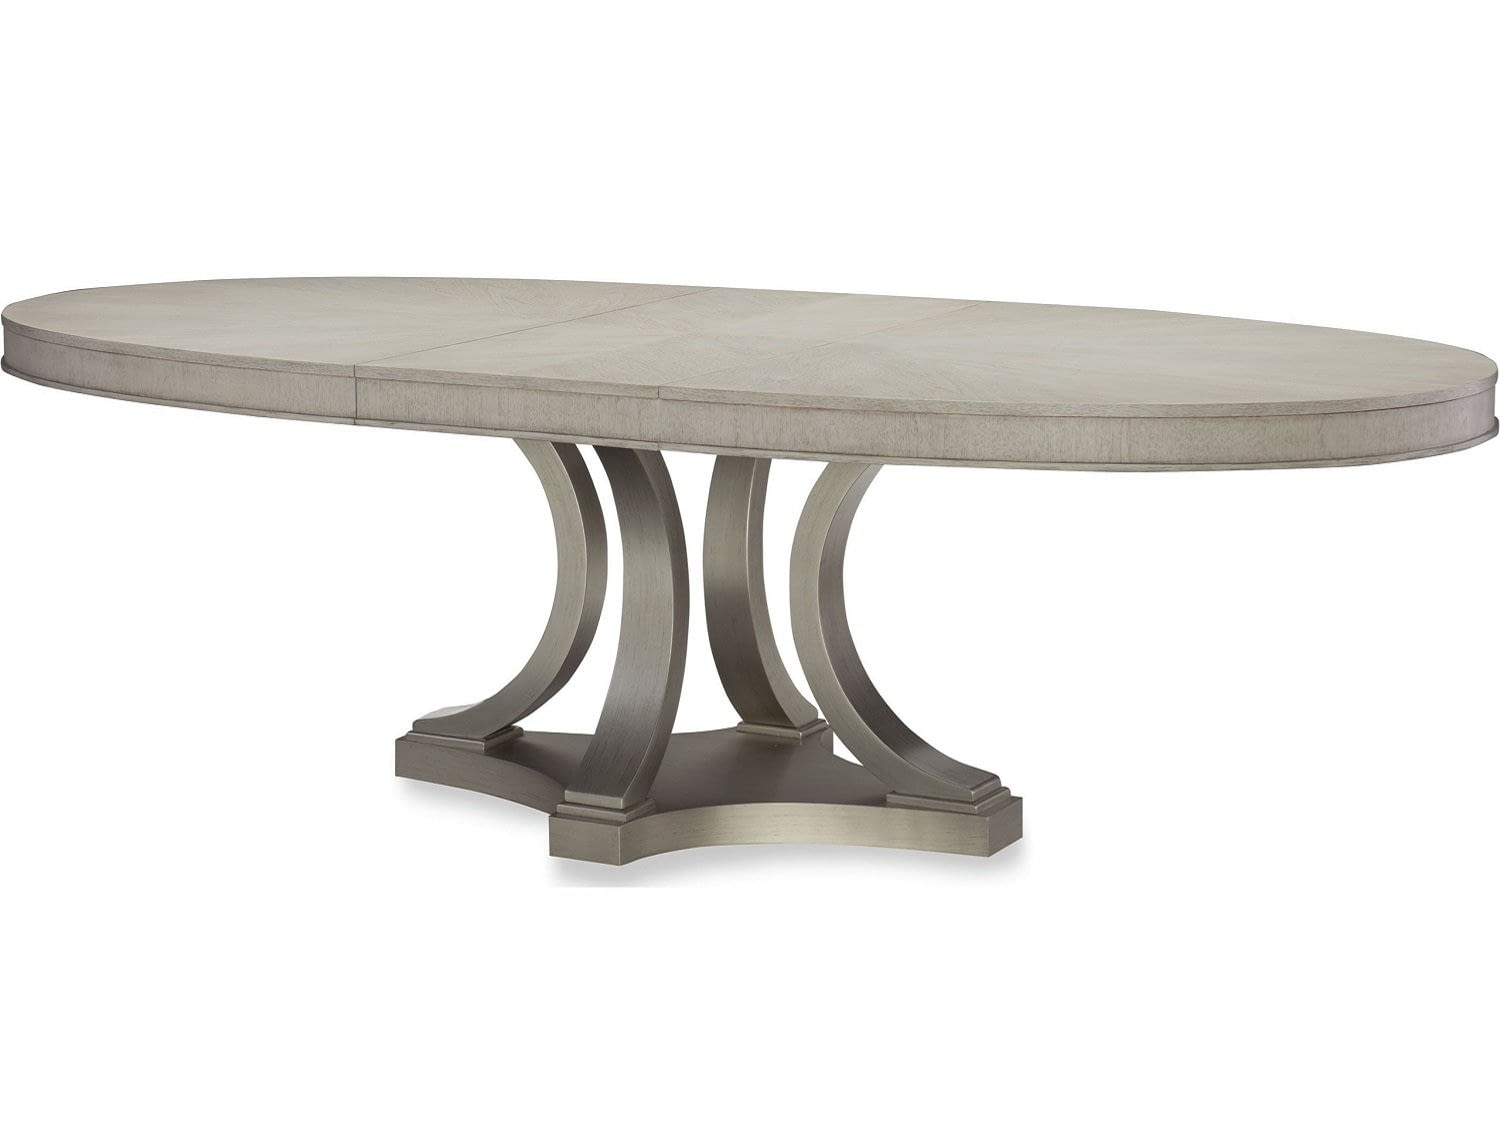 NYOMI Dining Table - Zoom